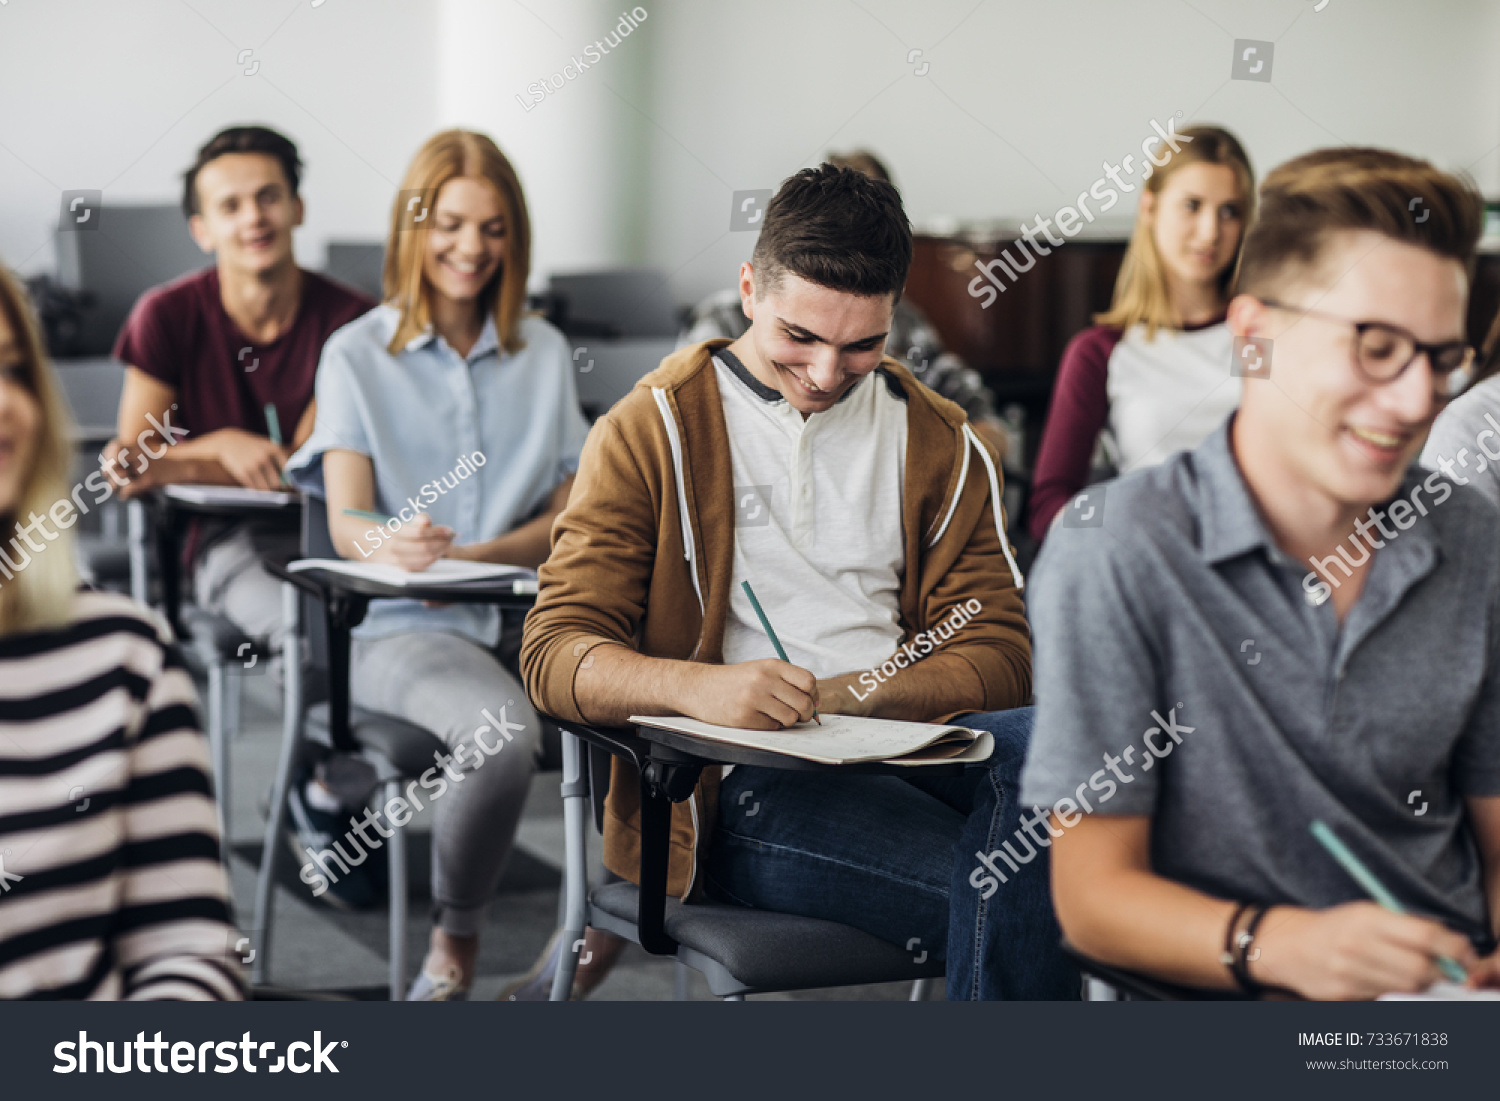 Group of high school students sitting in classroom and writing in notebooks. #733671838